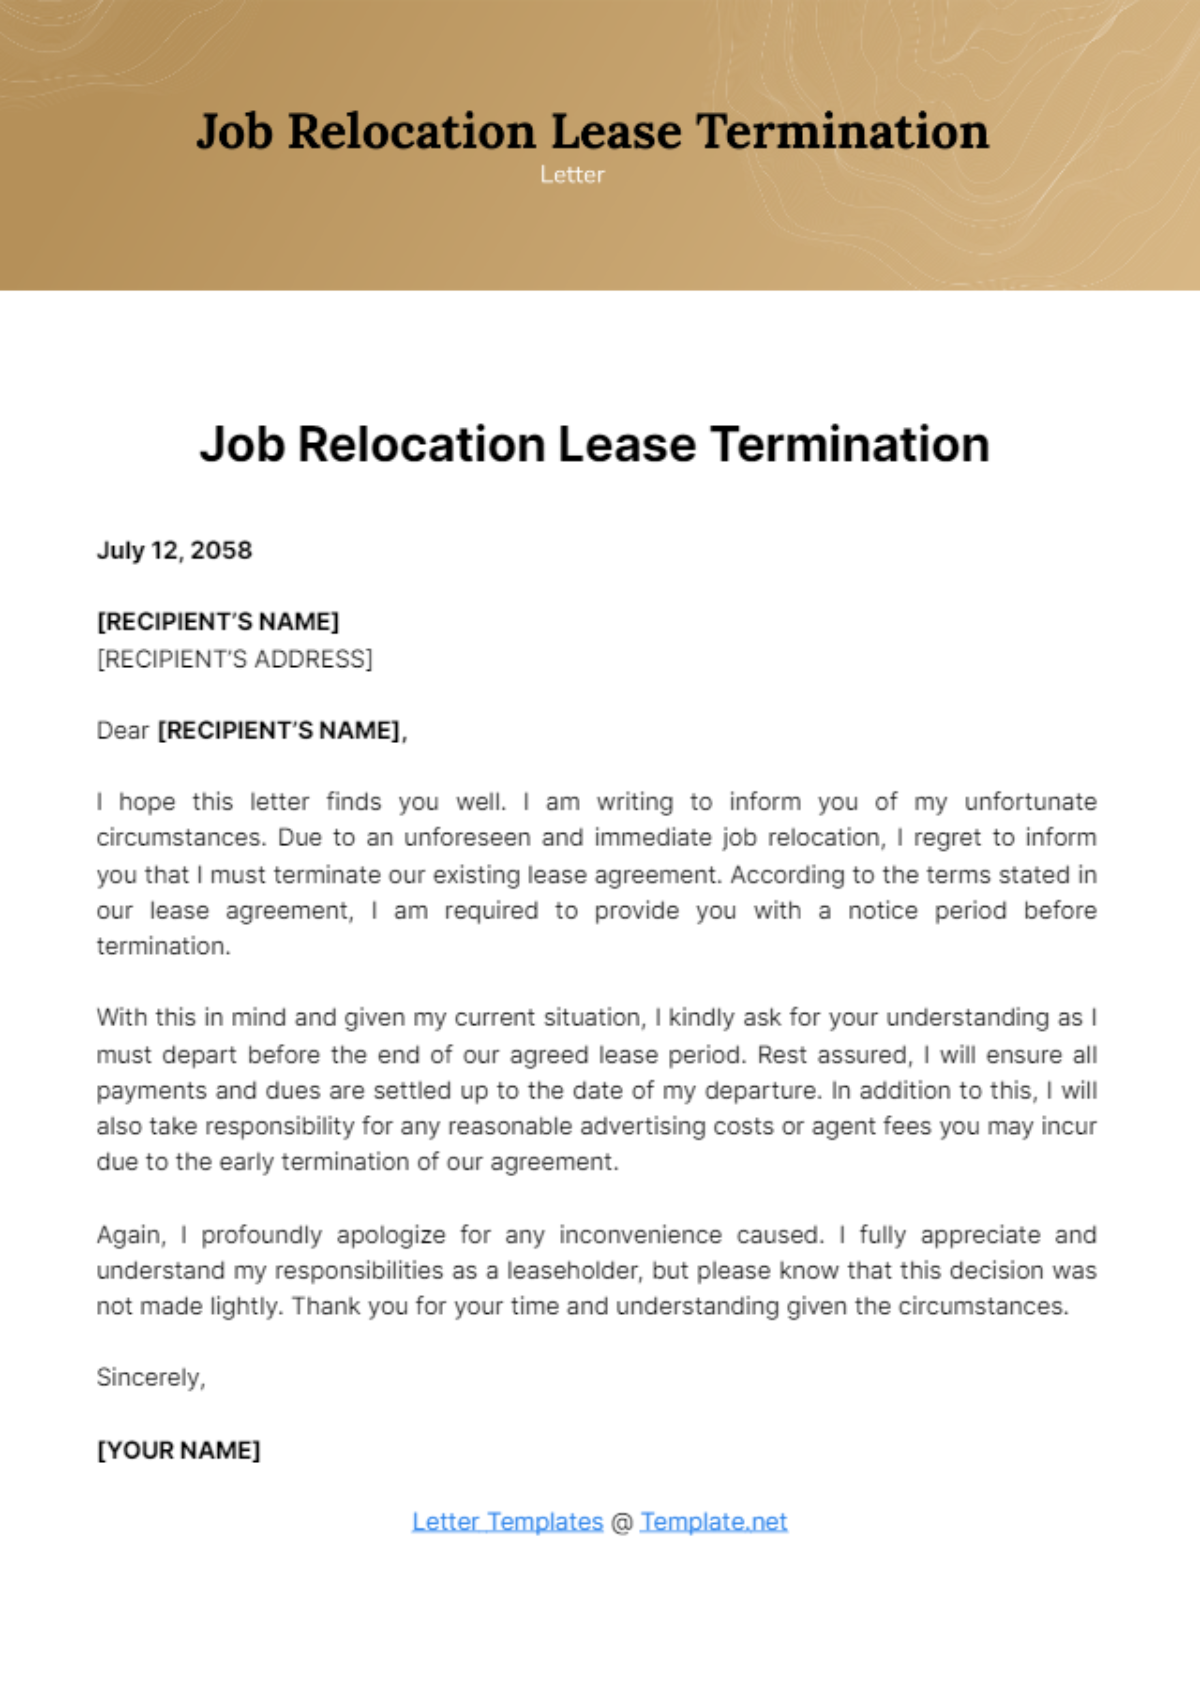 Job Relocation Lease Termination Letter Template